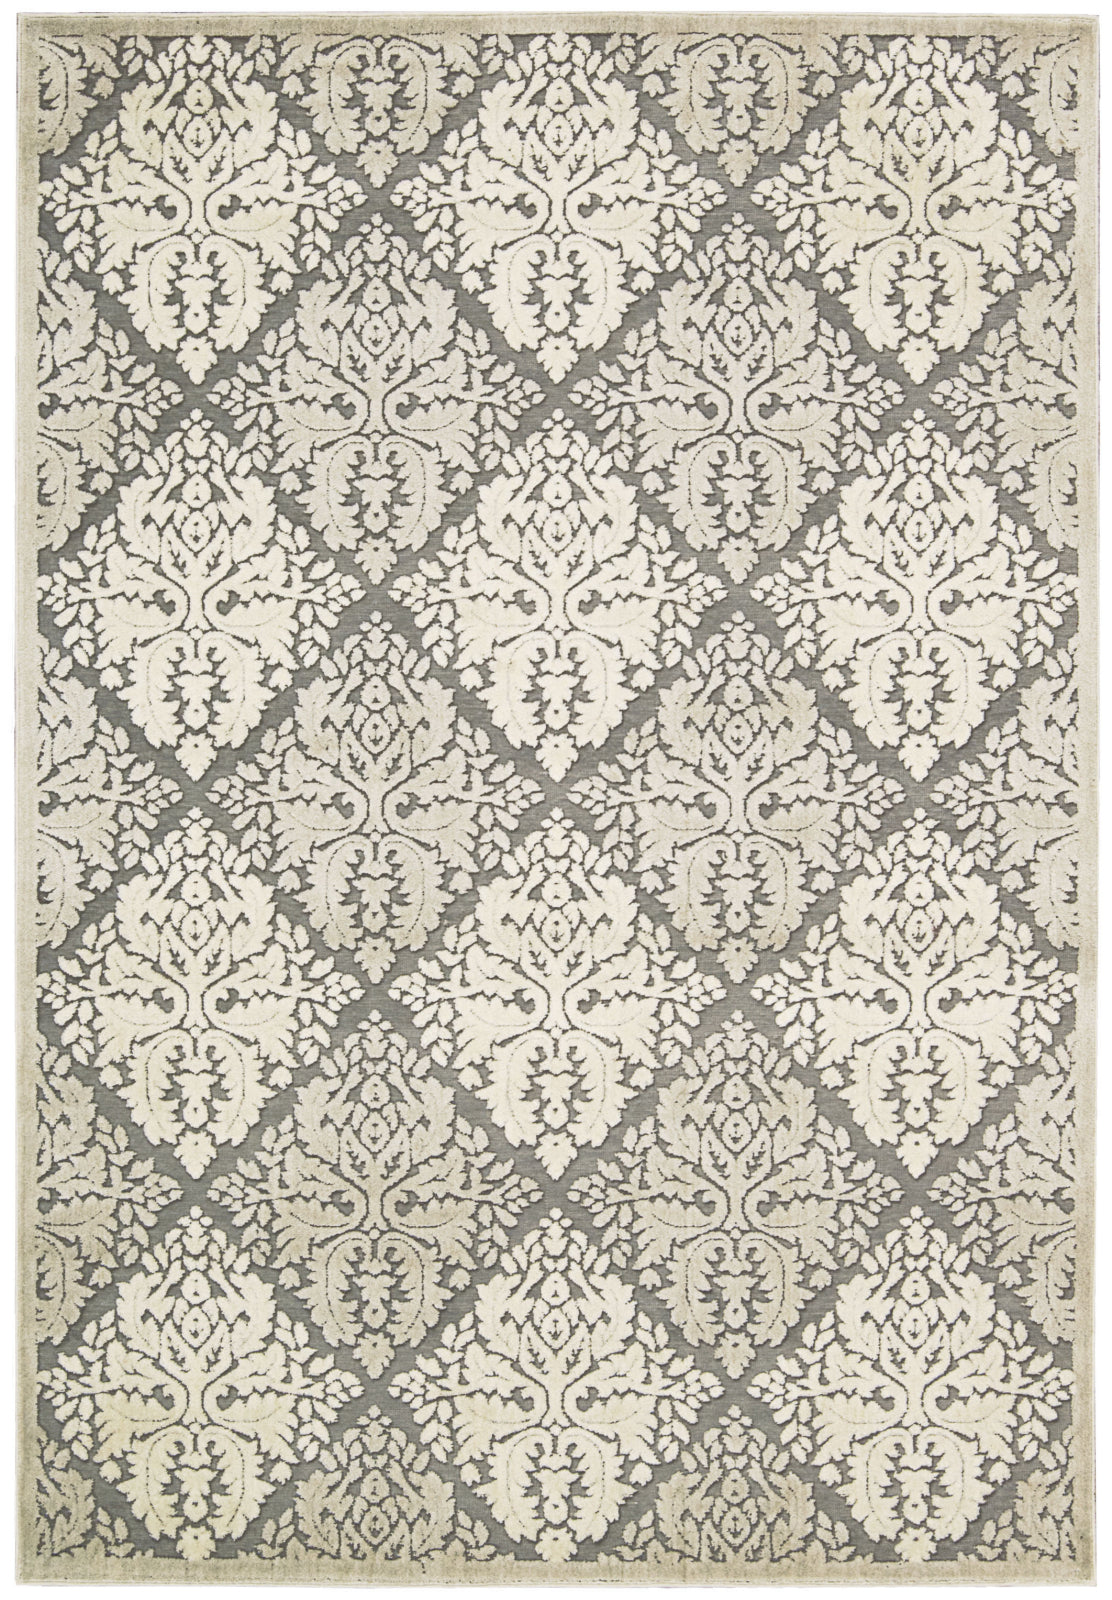 Nourison Graphic Illusions GIL08 Ivory Area Rug main image